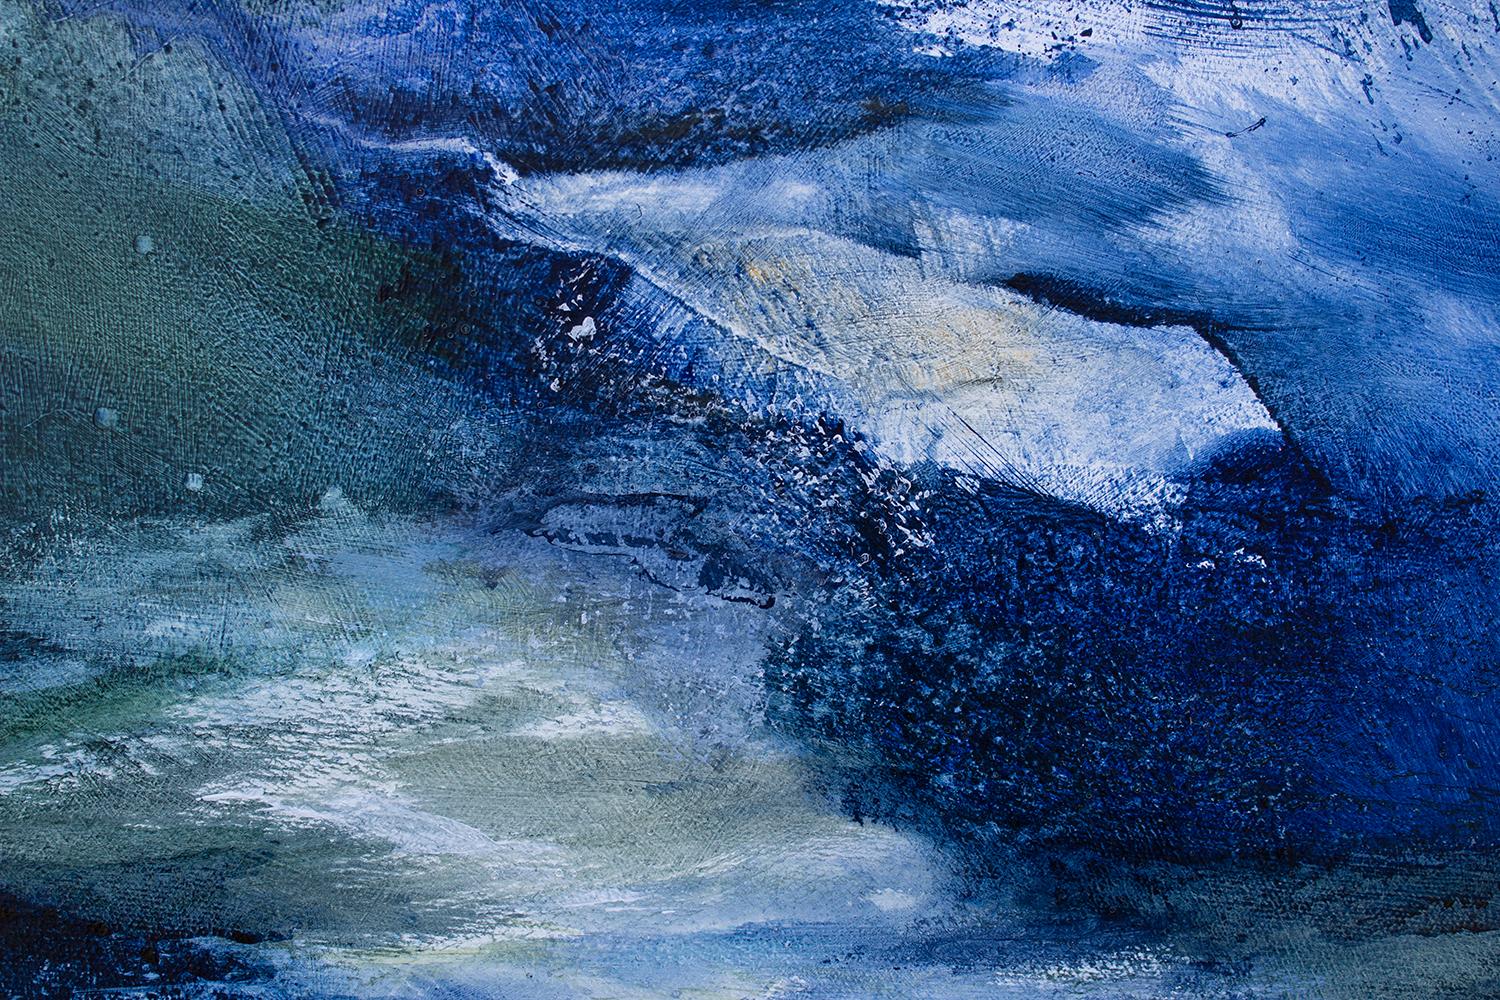 <p>Artist Comments<br>Artist Karen Hansen envisions an abstract seascape of raging waves crashing into each other. She paints experiences reminiscent of nature for her tantalizing Forest Bathing series. Throughout the process, Karen responds to what